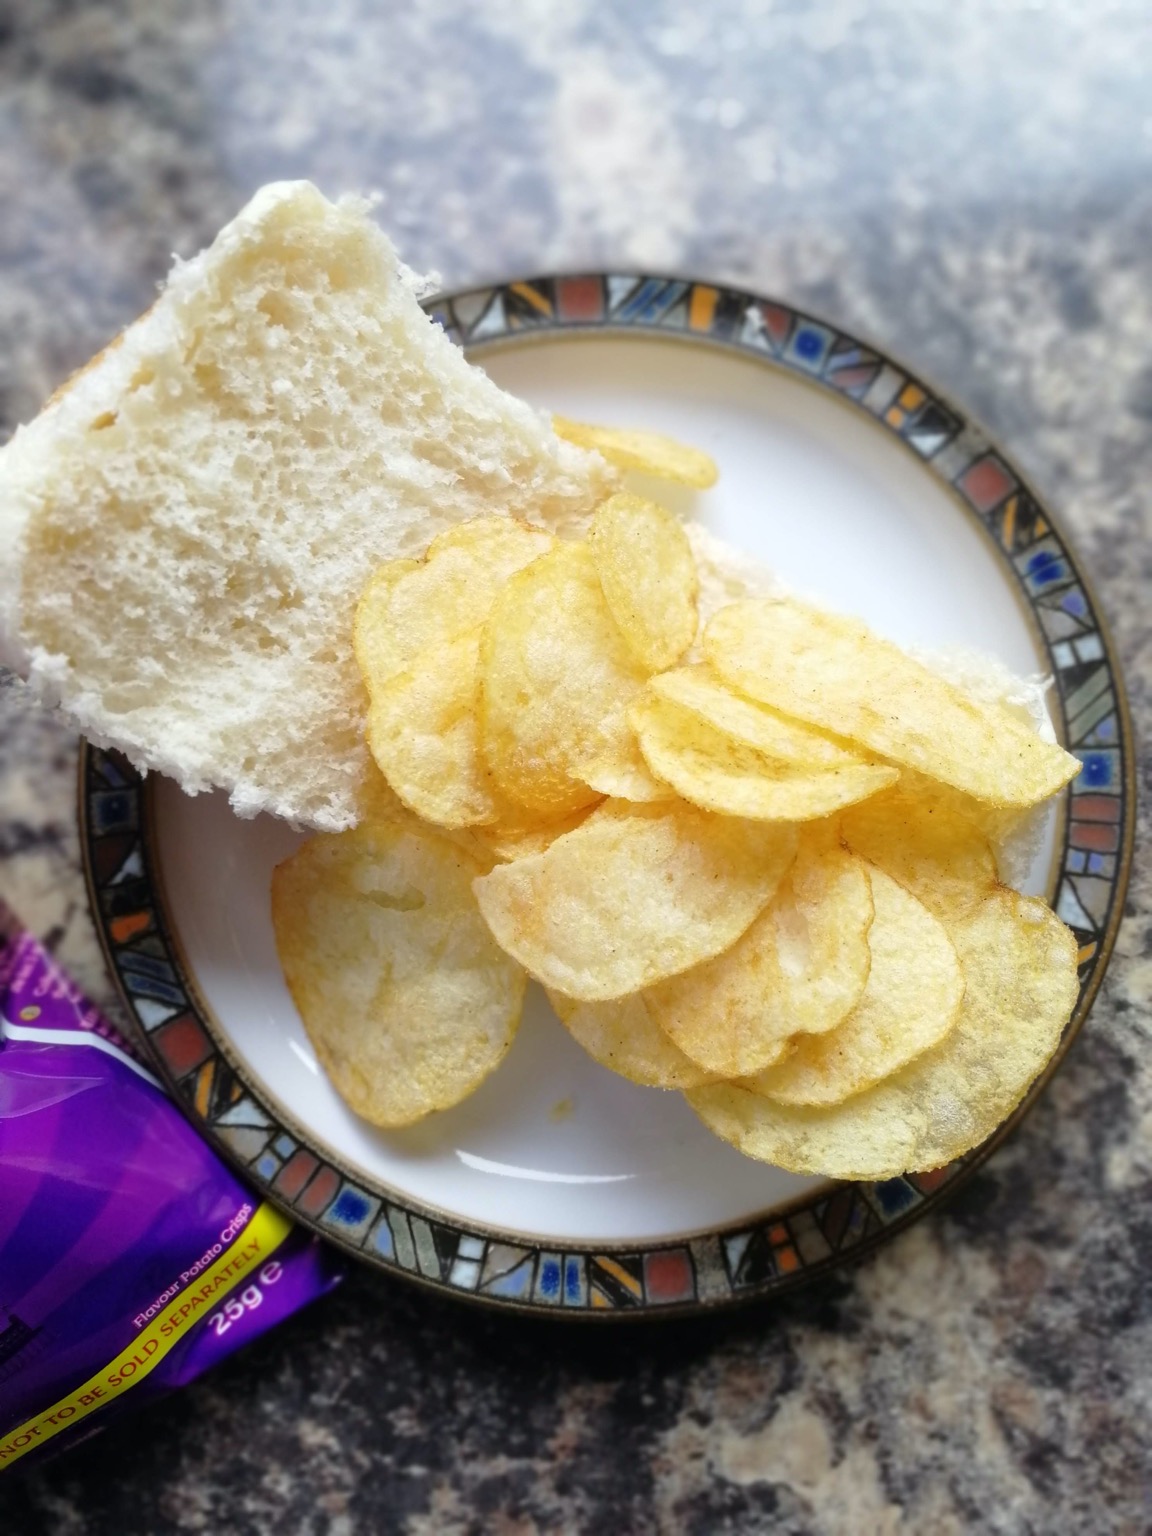 Open white roll with crisps on it and bag visible